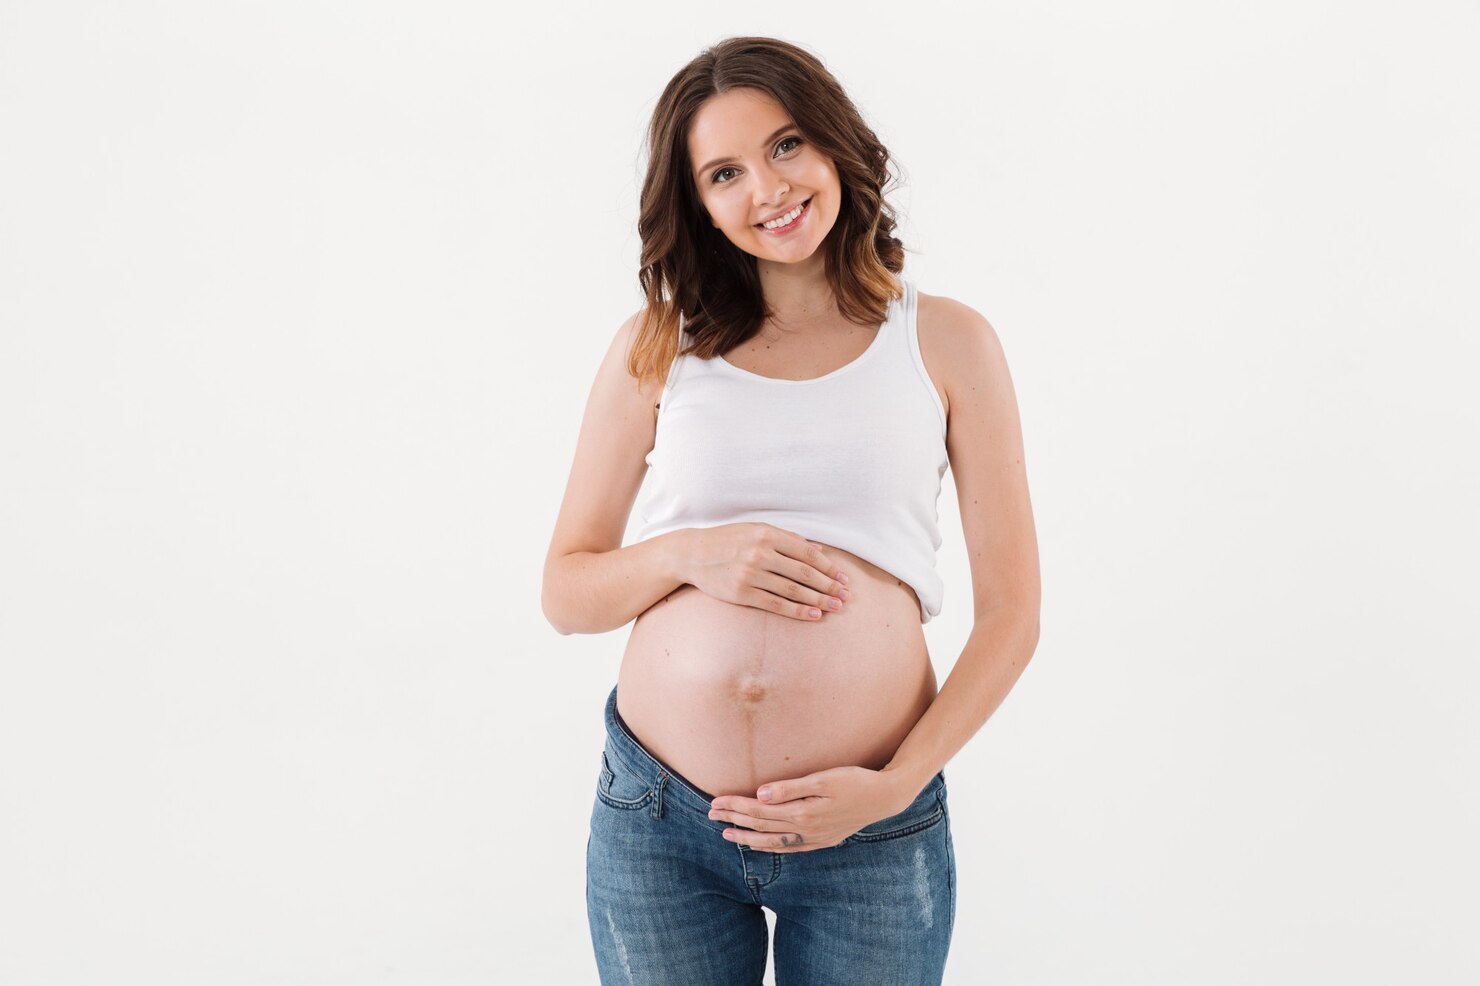 A joyful pregnant woman laughing while holding her belly.